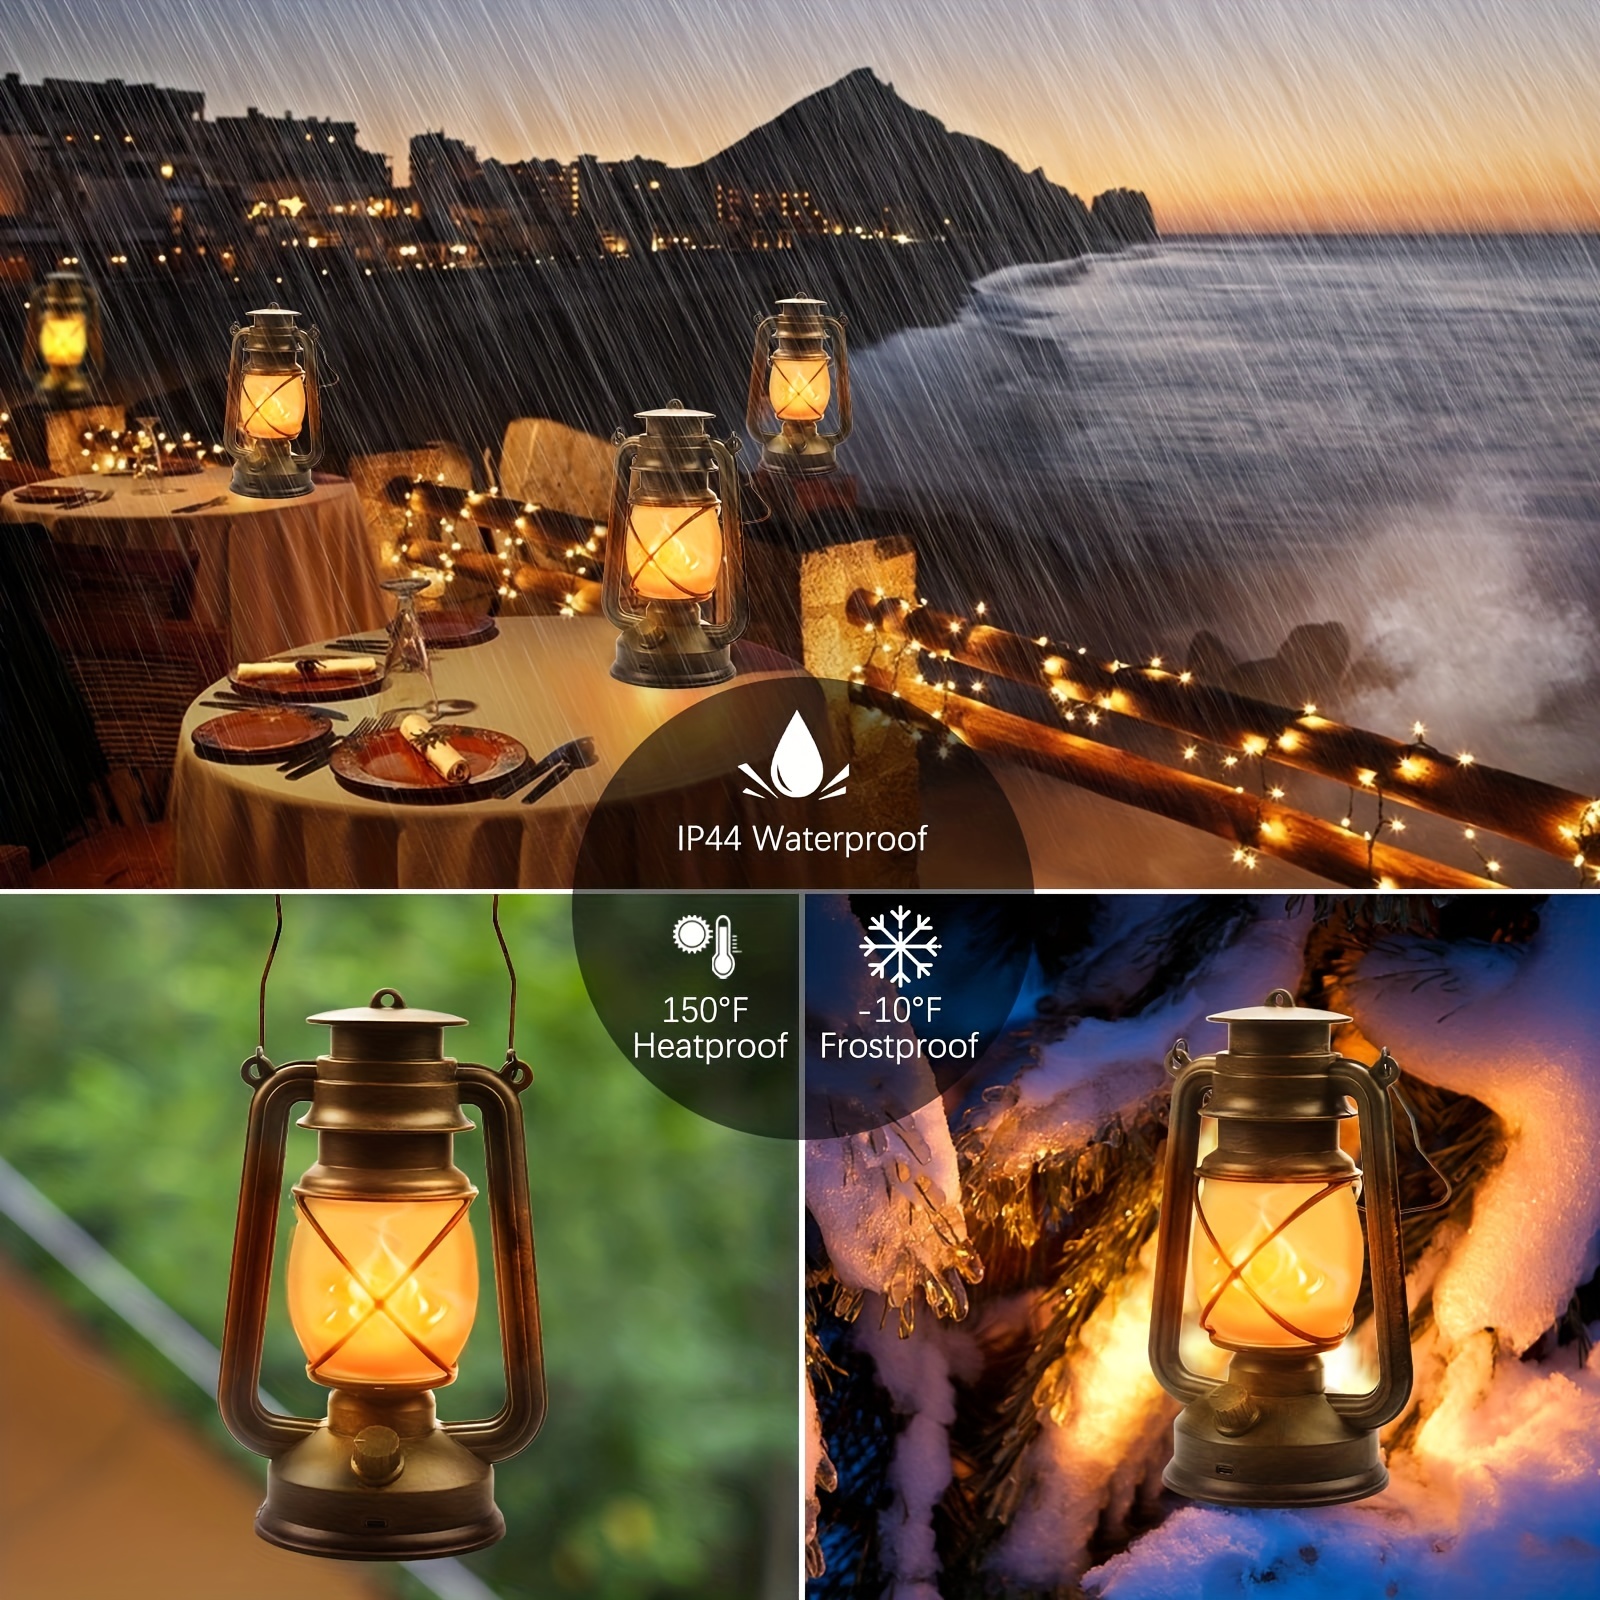 LED Vintage Lantern Flickering Flame, Indoor/Outdoor Hanging Decorations  Lanterns for Patio Waterproof, Remote Control, Timer, Christmas Decorative